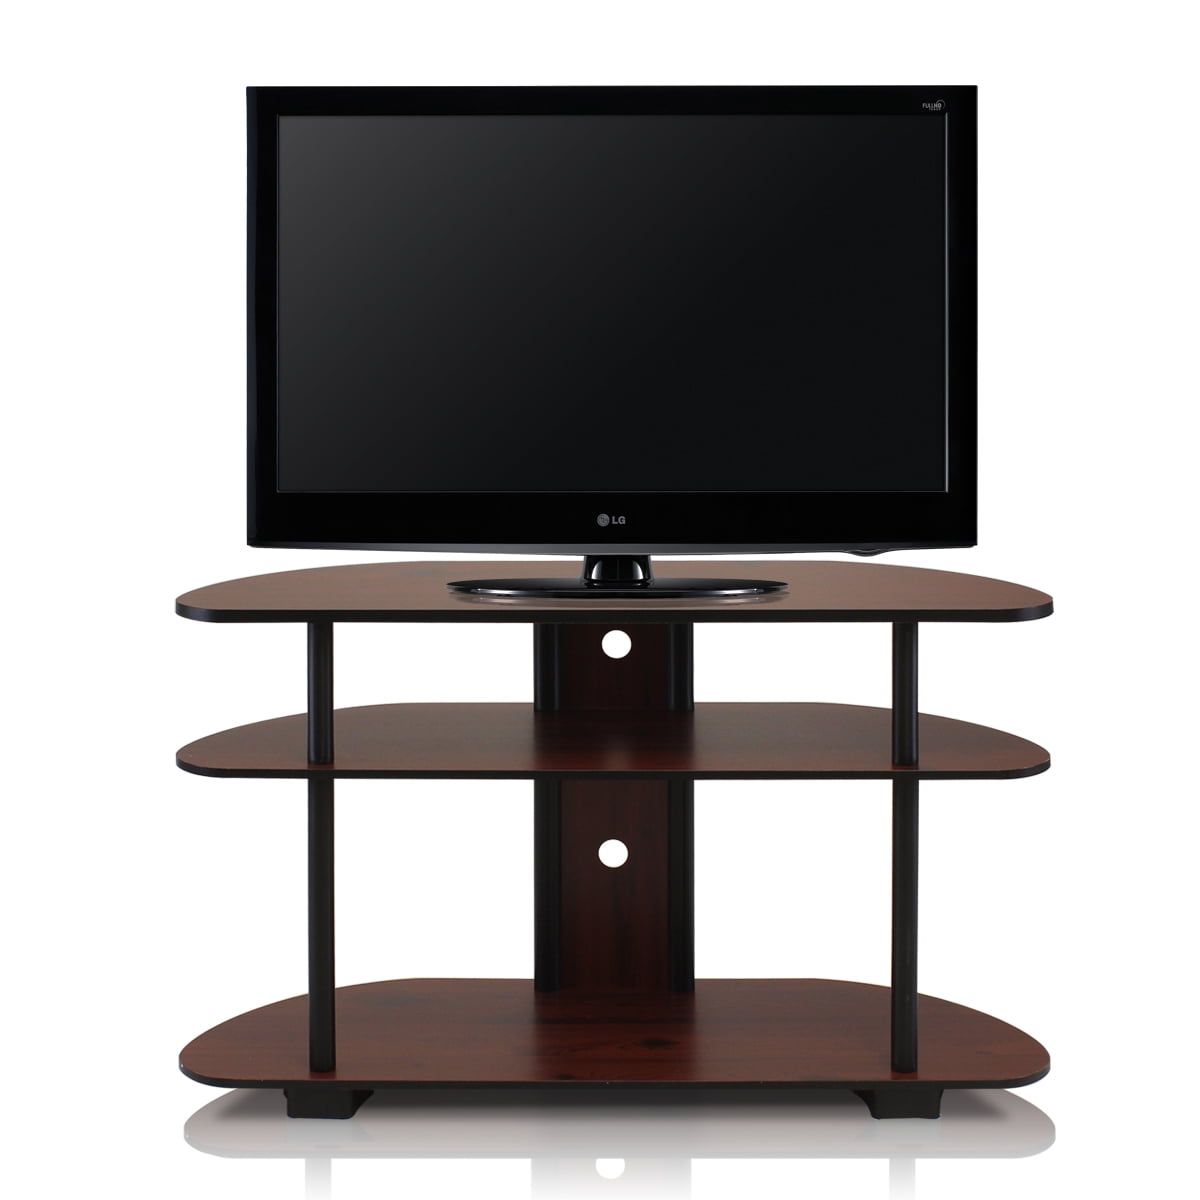 Turn N Tube 3 Tier Tv Stand For Tvs Up To 43 , Multiple Colors Regarding Tier Stands For Tvs (View 12 of 20)